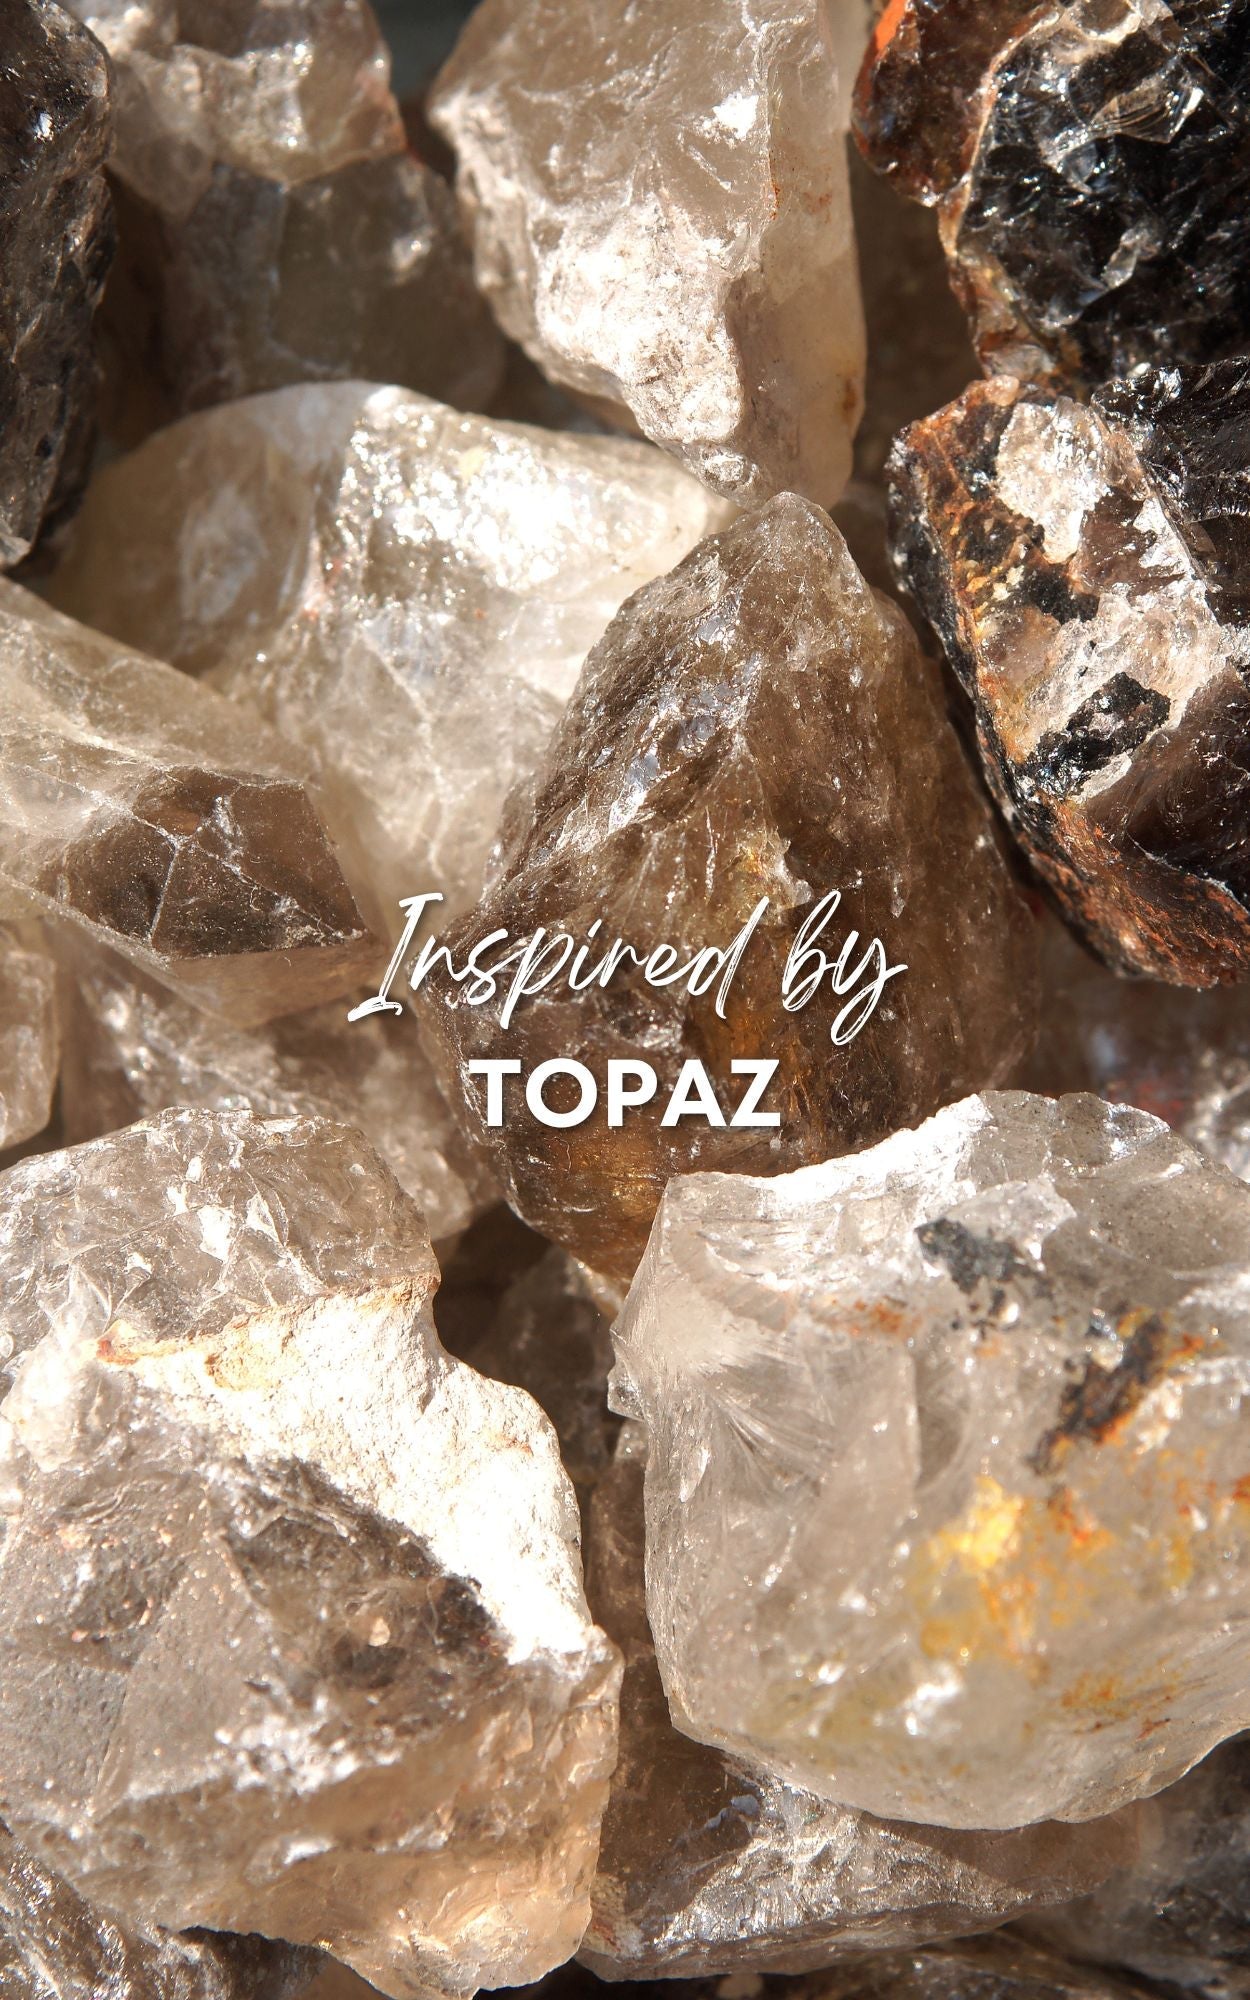 Topaz Vanity Bottle by Sage, Pure Perfume Oil - The Sage Lifestyle